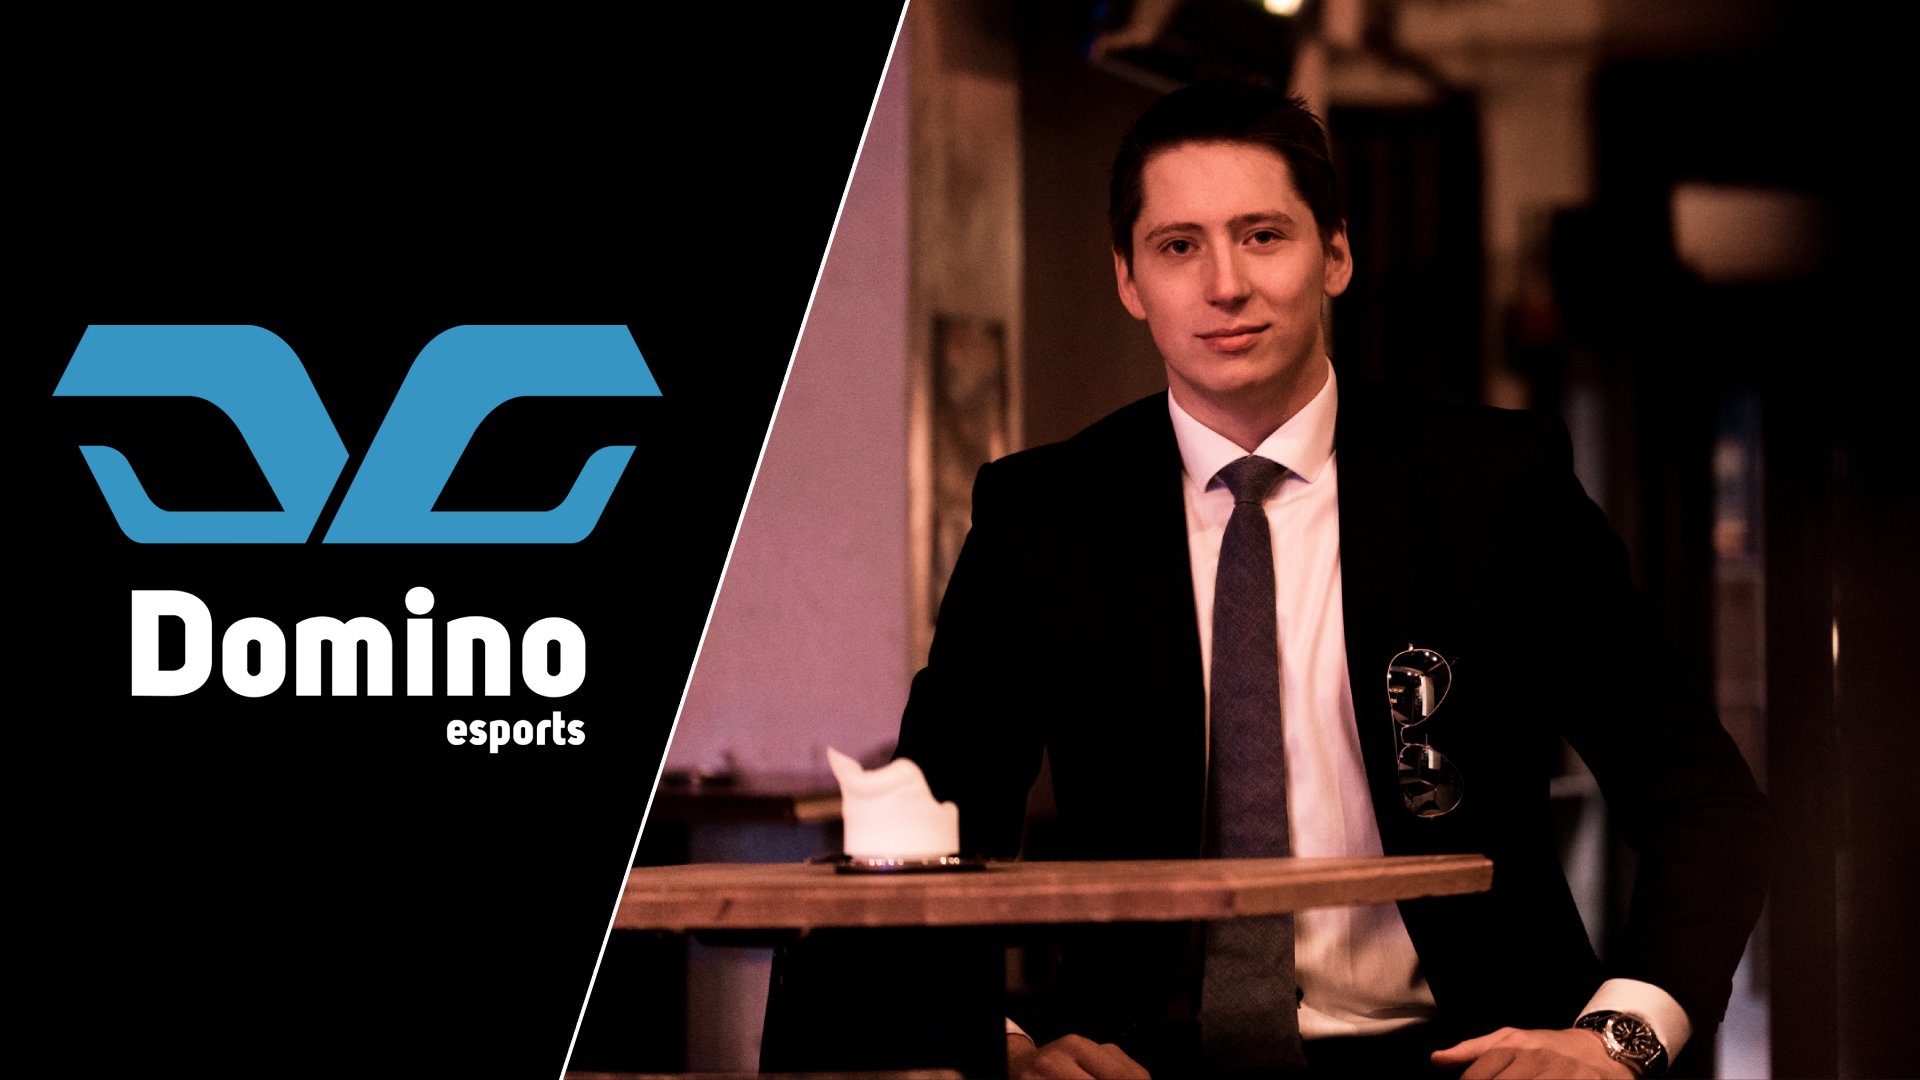 Domino Esports’ COO - Anders "The Doctor" Nordermoen appears alongside the Domino Esports logo.